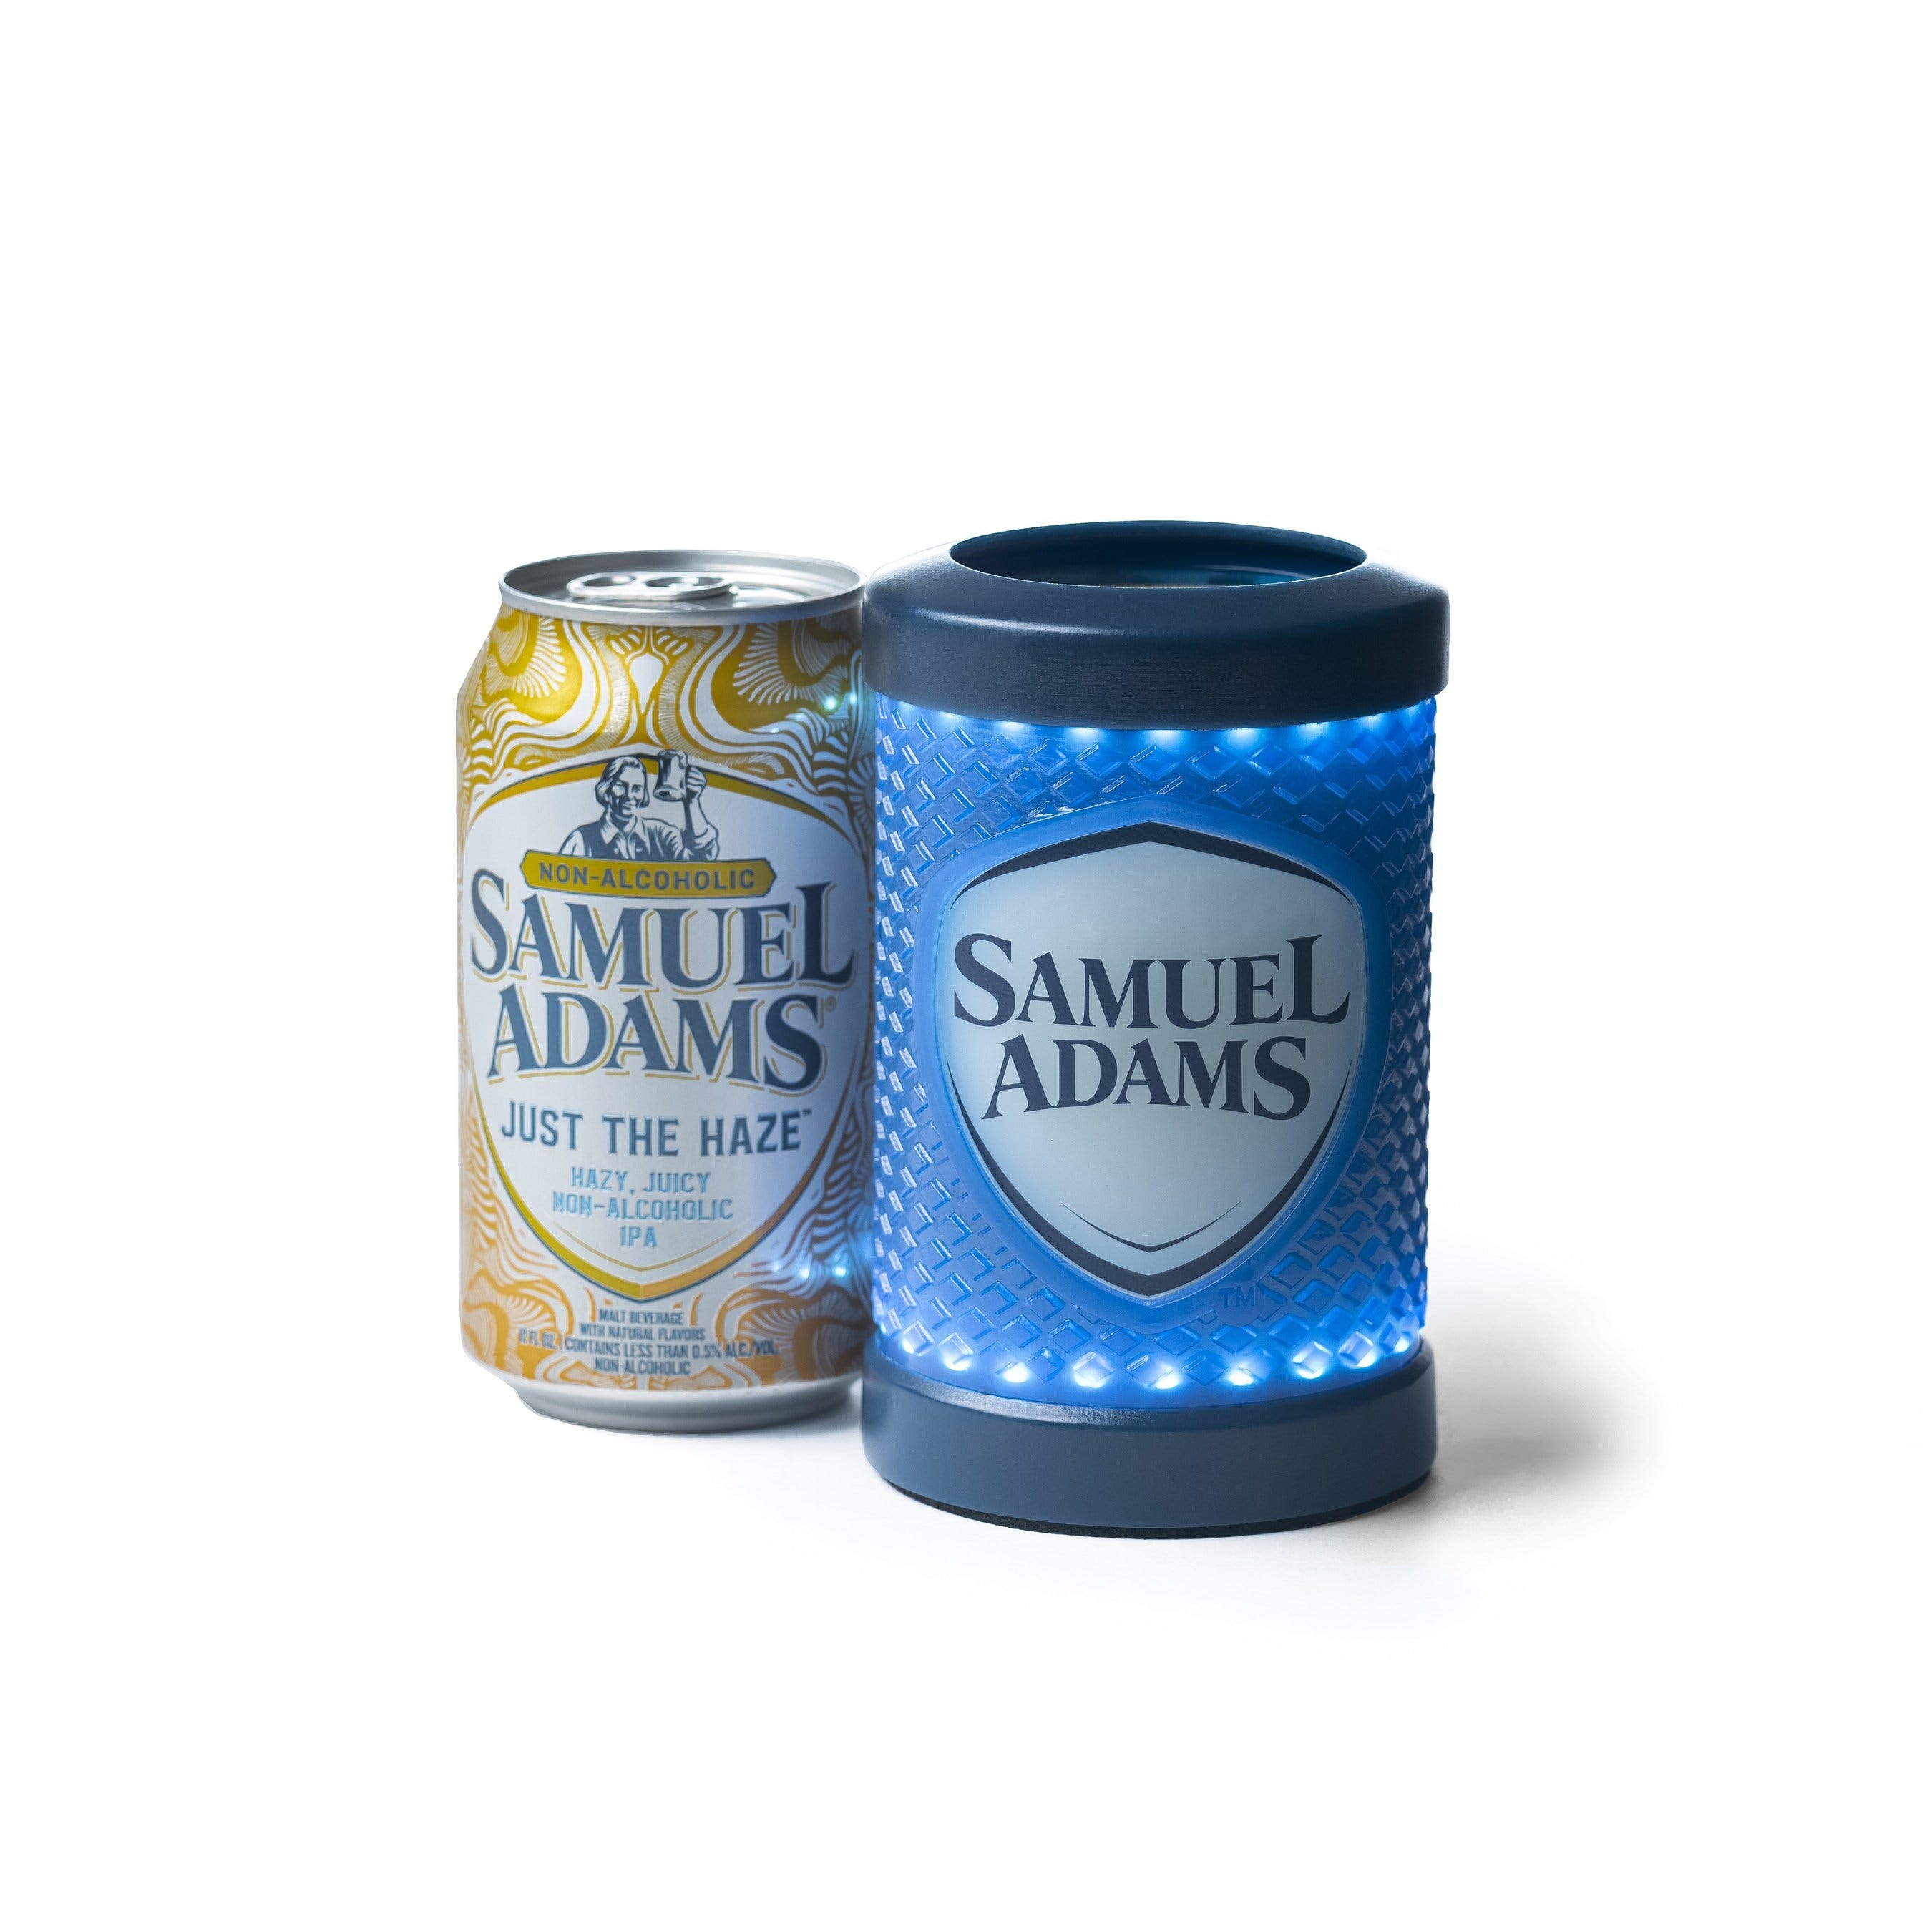 Sam Adams launches first booze-free IPA — and a device to help consumers monitor their drinking habits